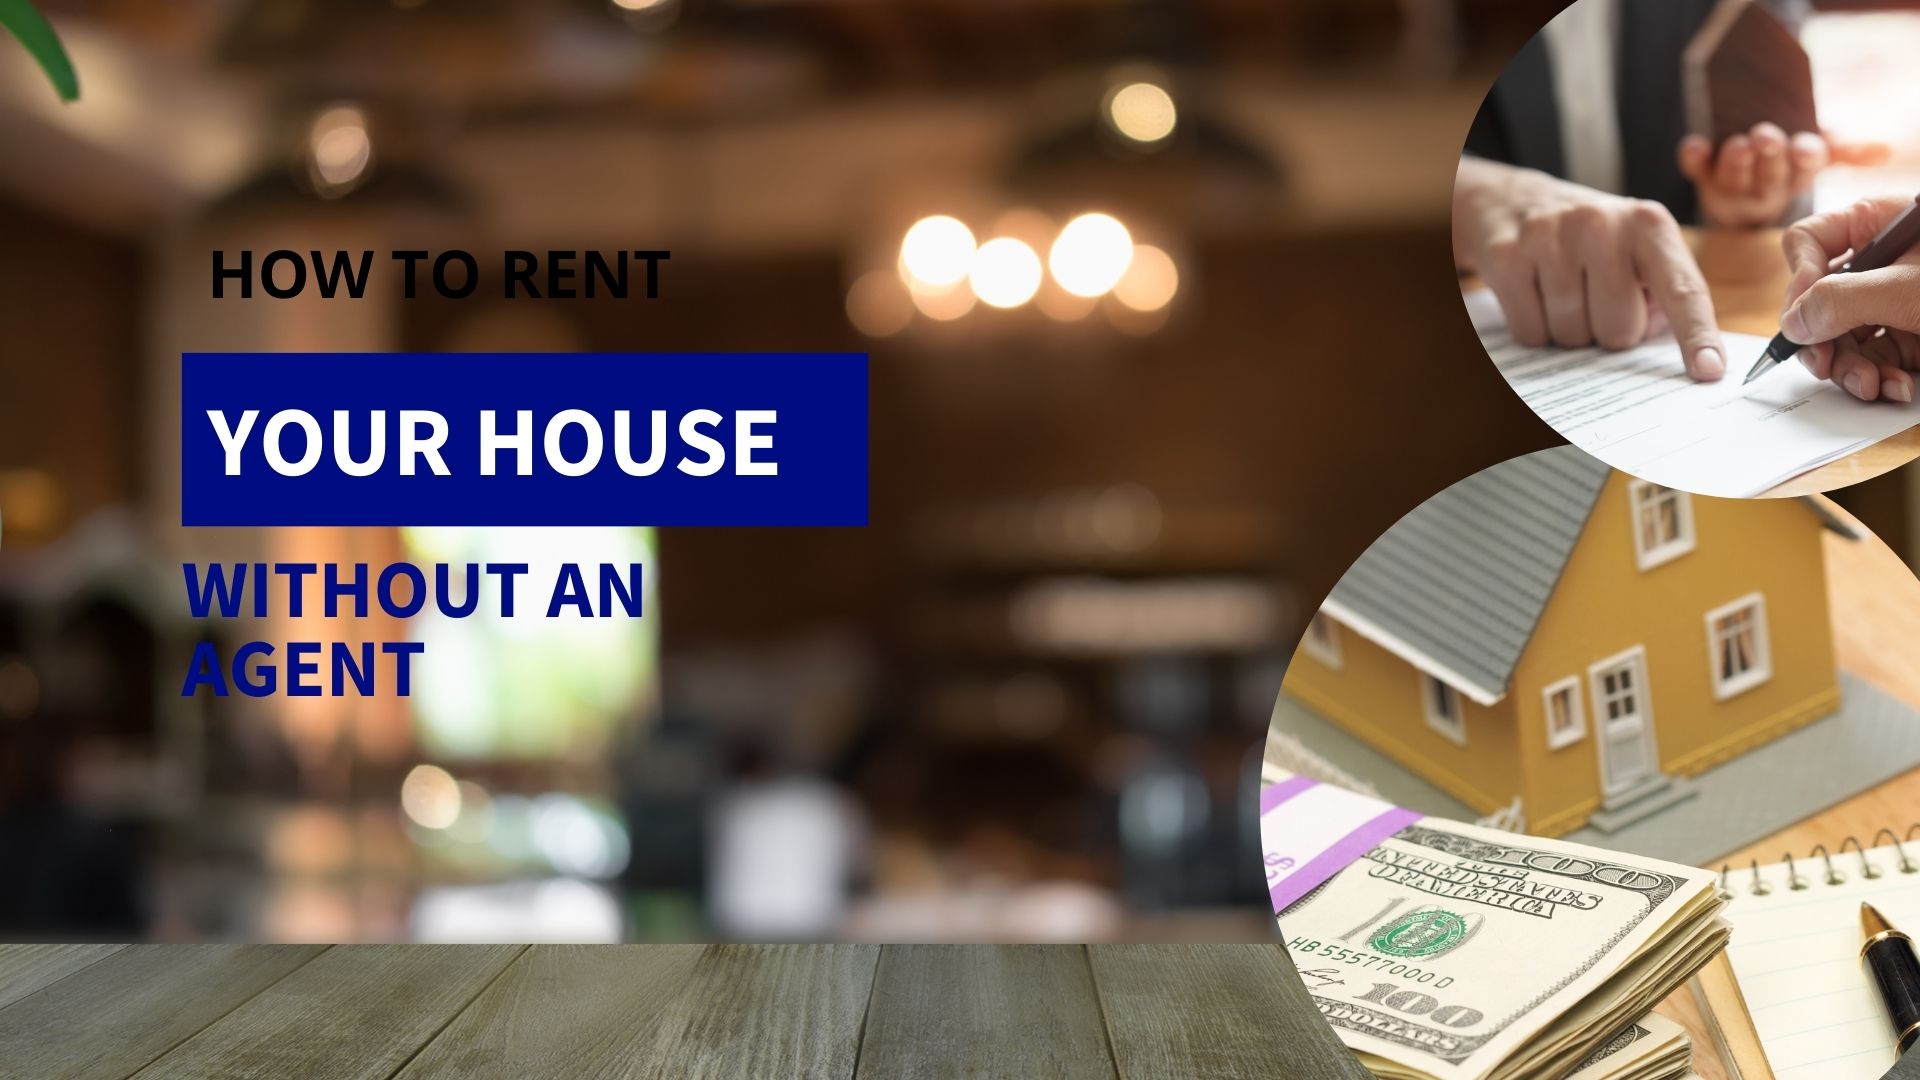 How to Rent Your House Without an Agent